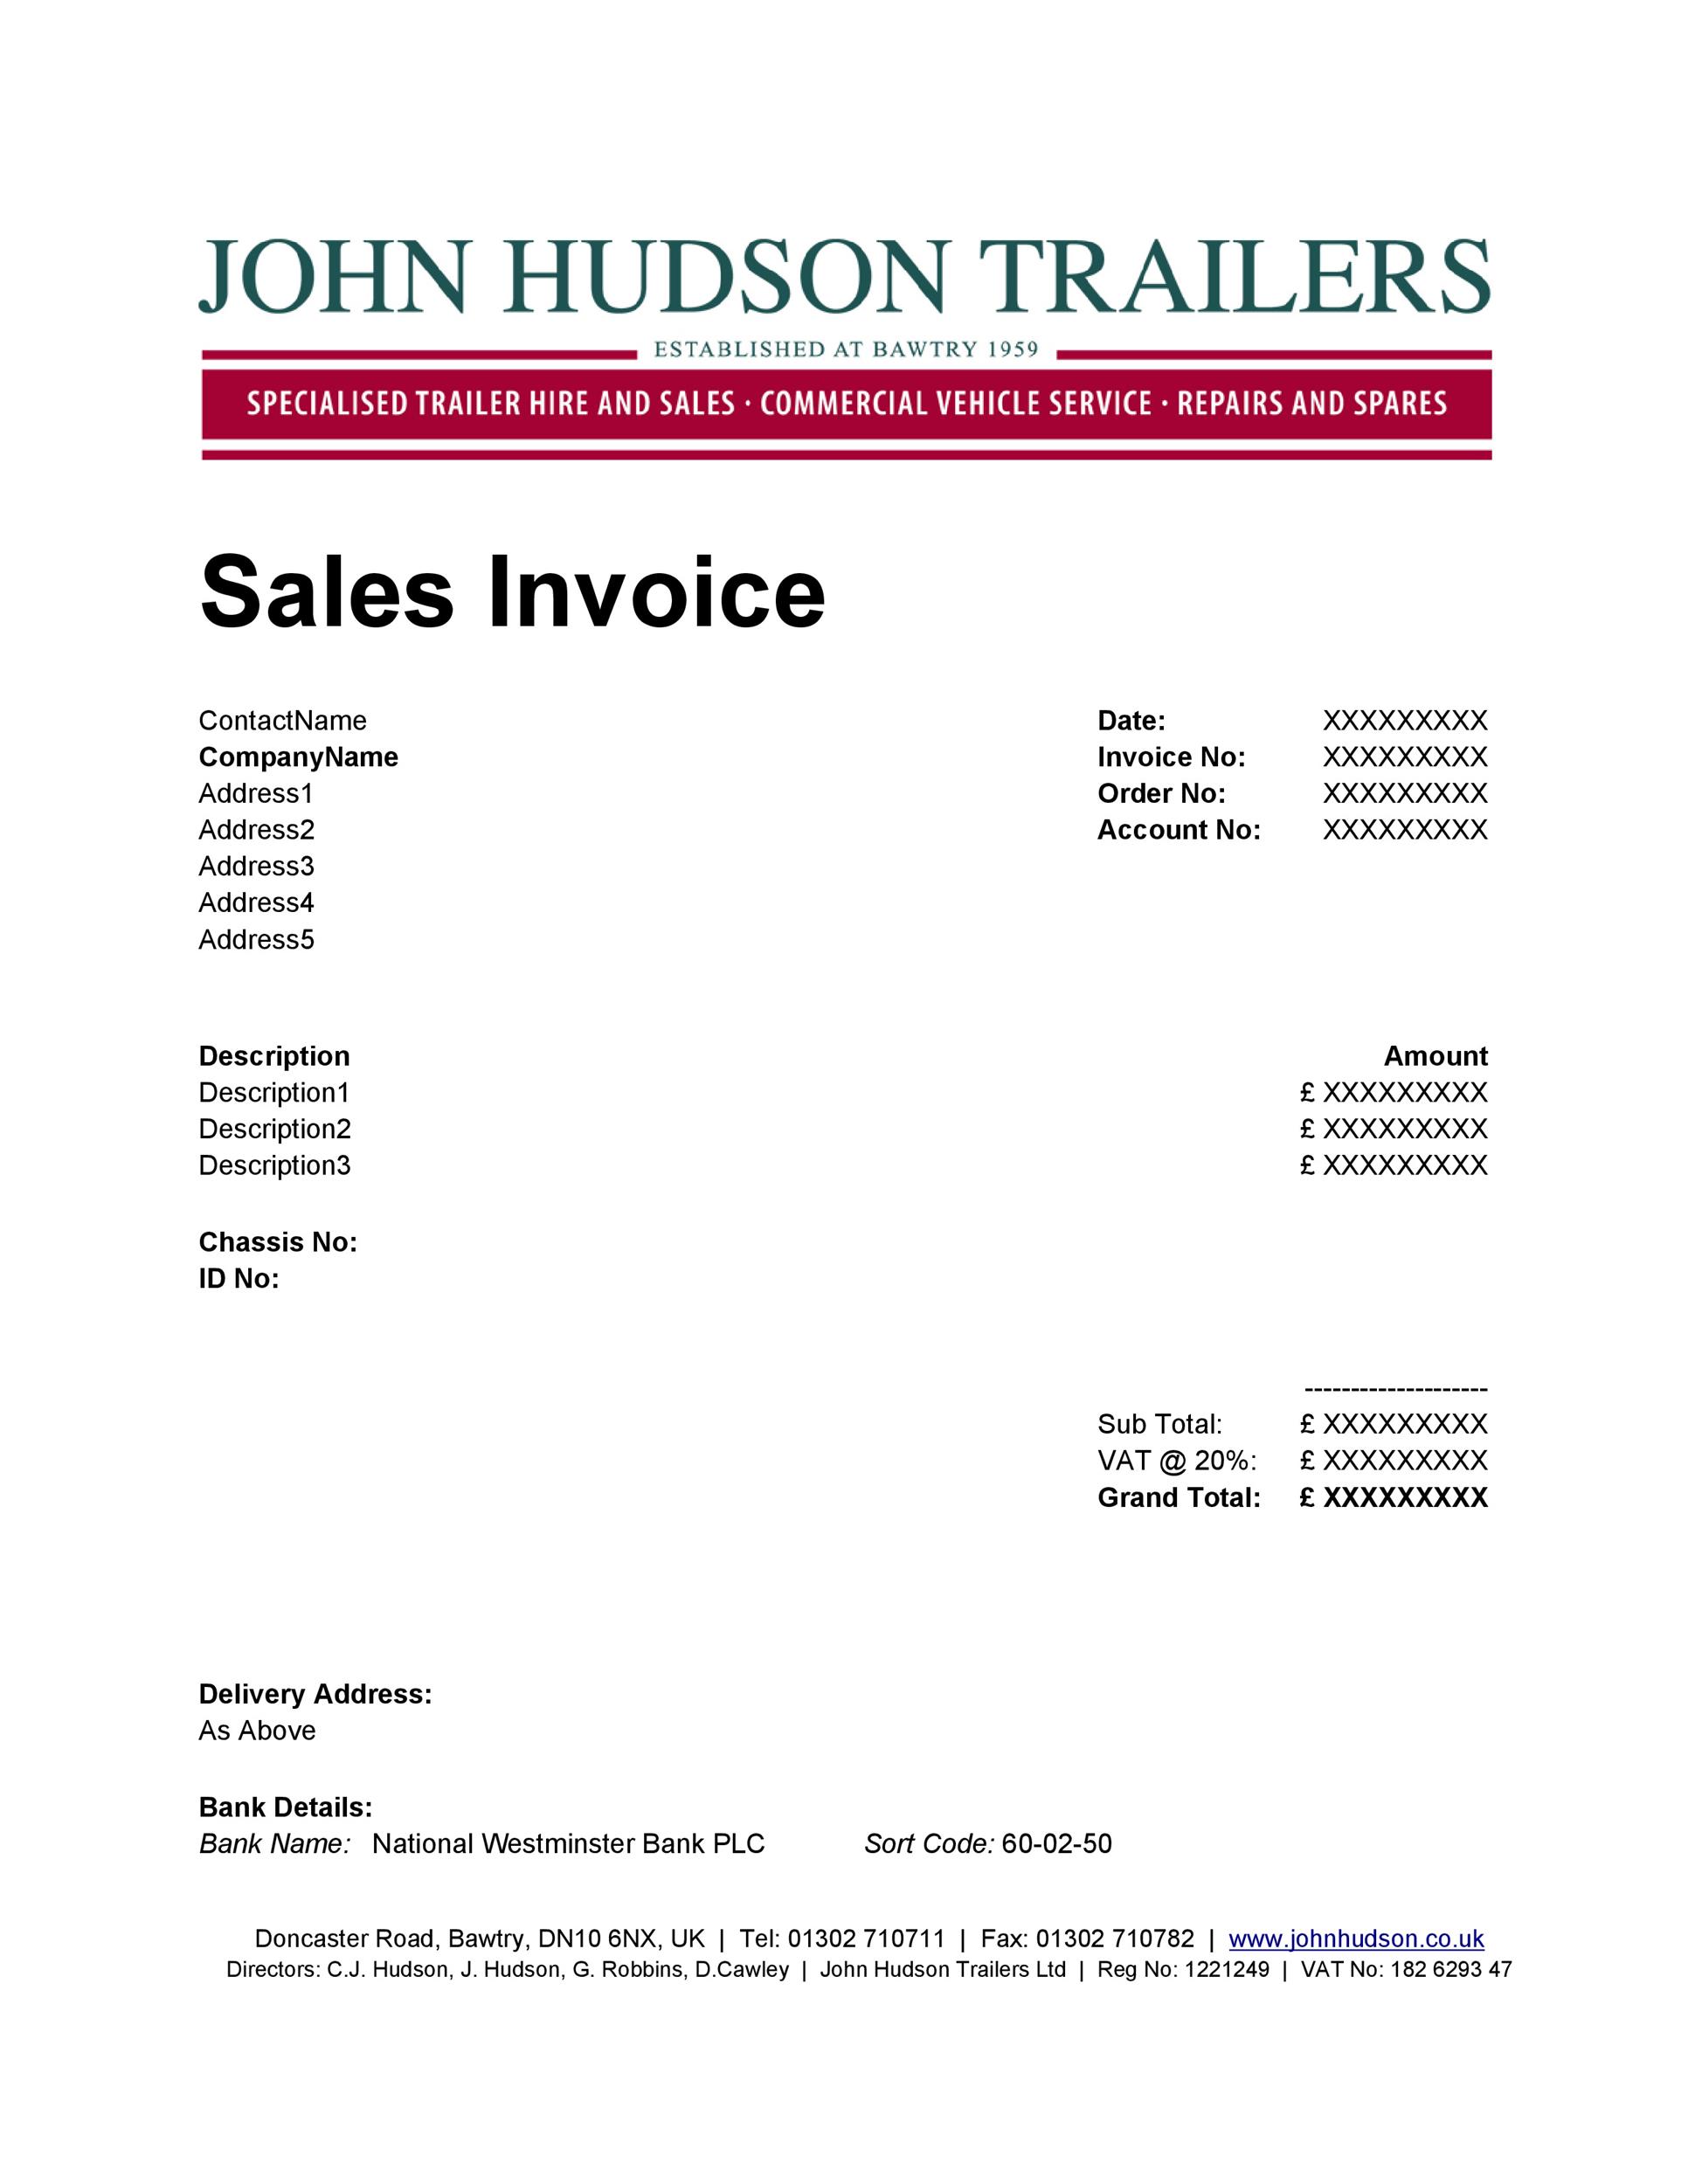 sale-invoice-templates-11-free-word-excel-pdf-formats-samples